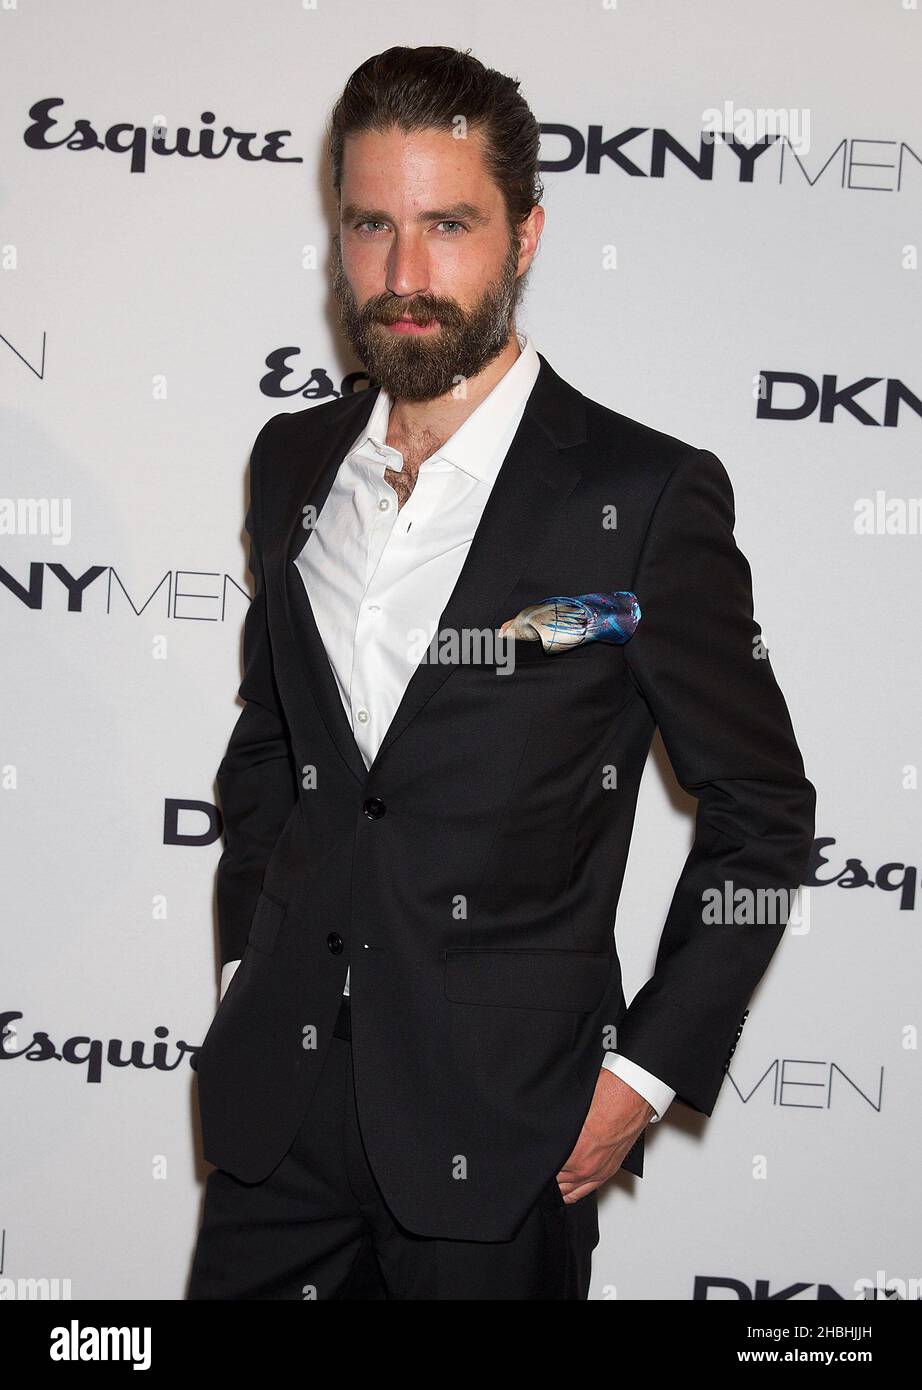 Jack Guiness kommt bei dem Debut London Collections Step and Repeat der DKNYMEN in London an. Stockfoto